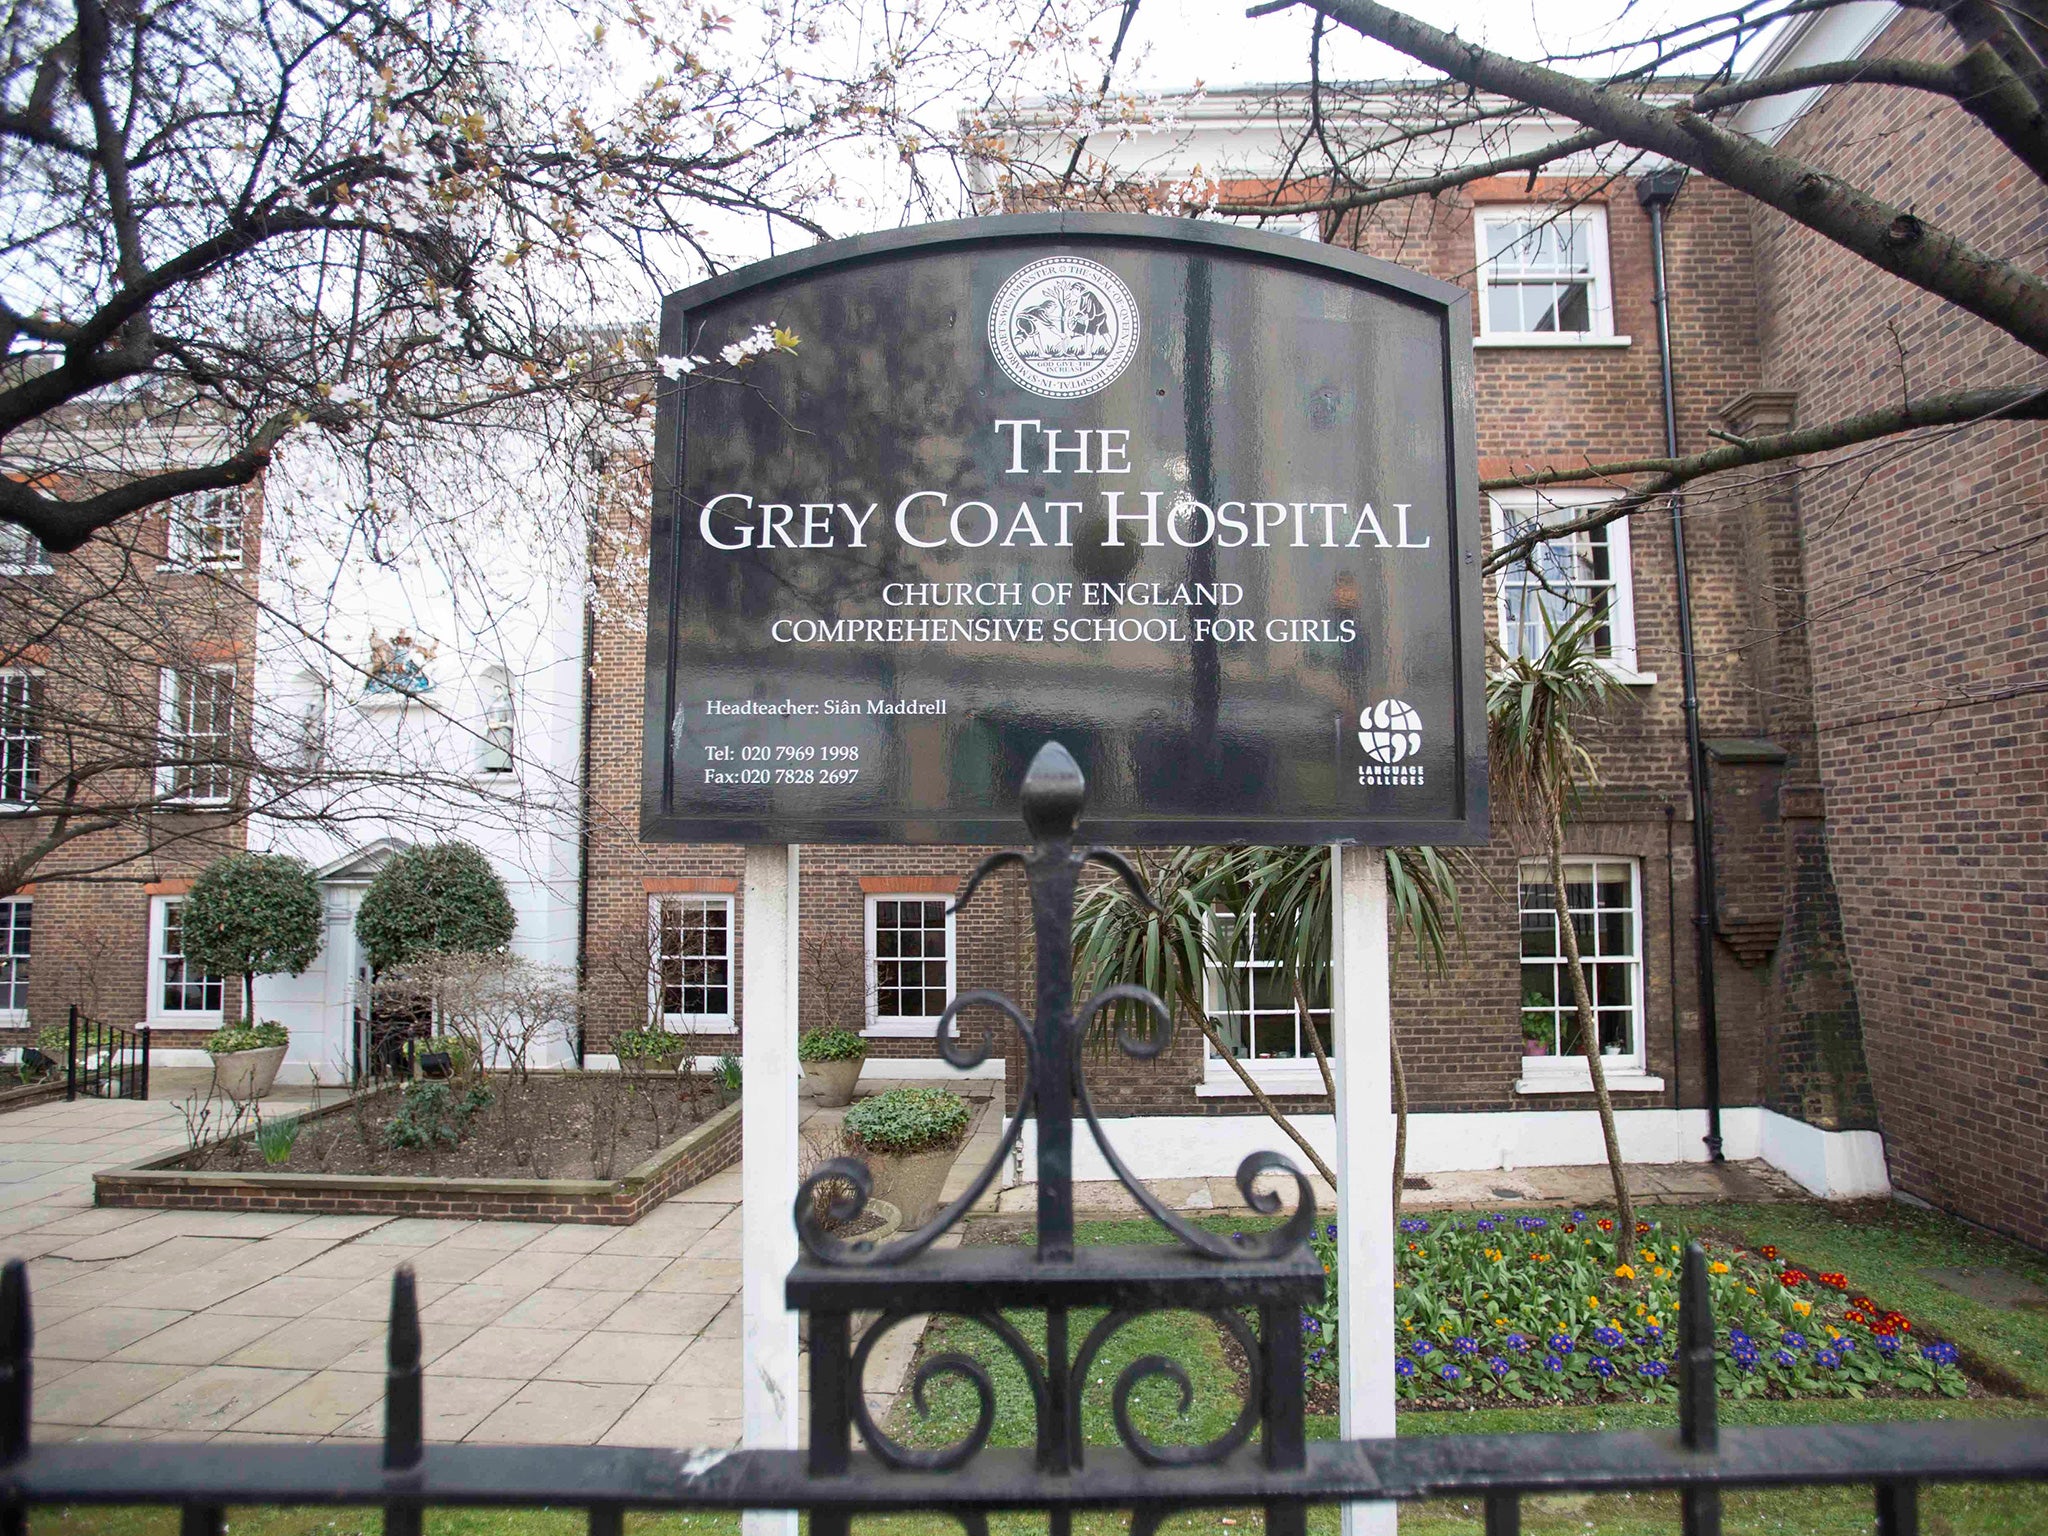 Last week it emerged that the Prime Minister’s daughter Nancy will attend The Grey Coat Hospital School, in Westminster, central London